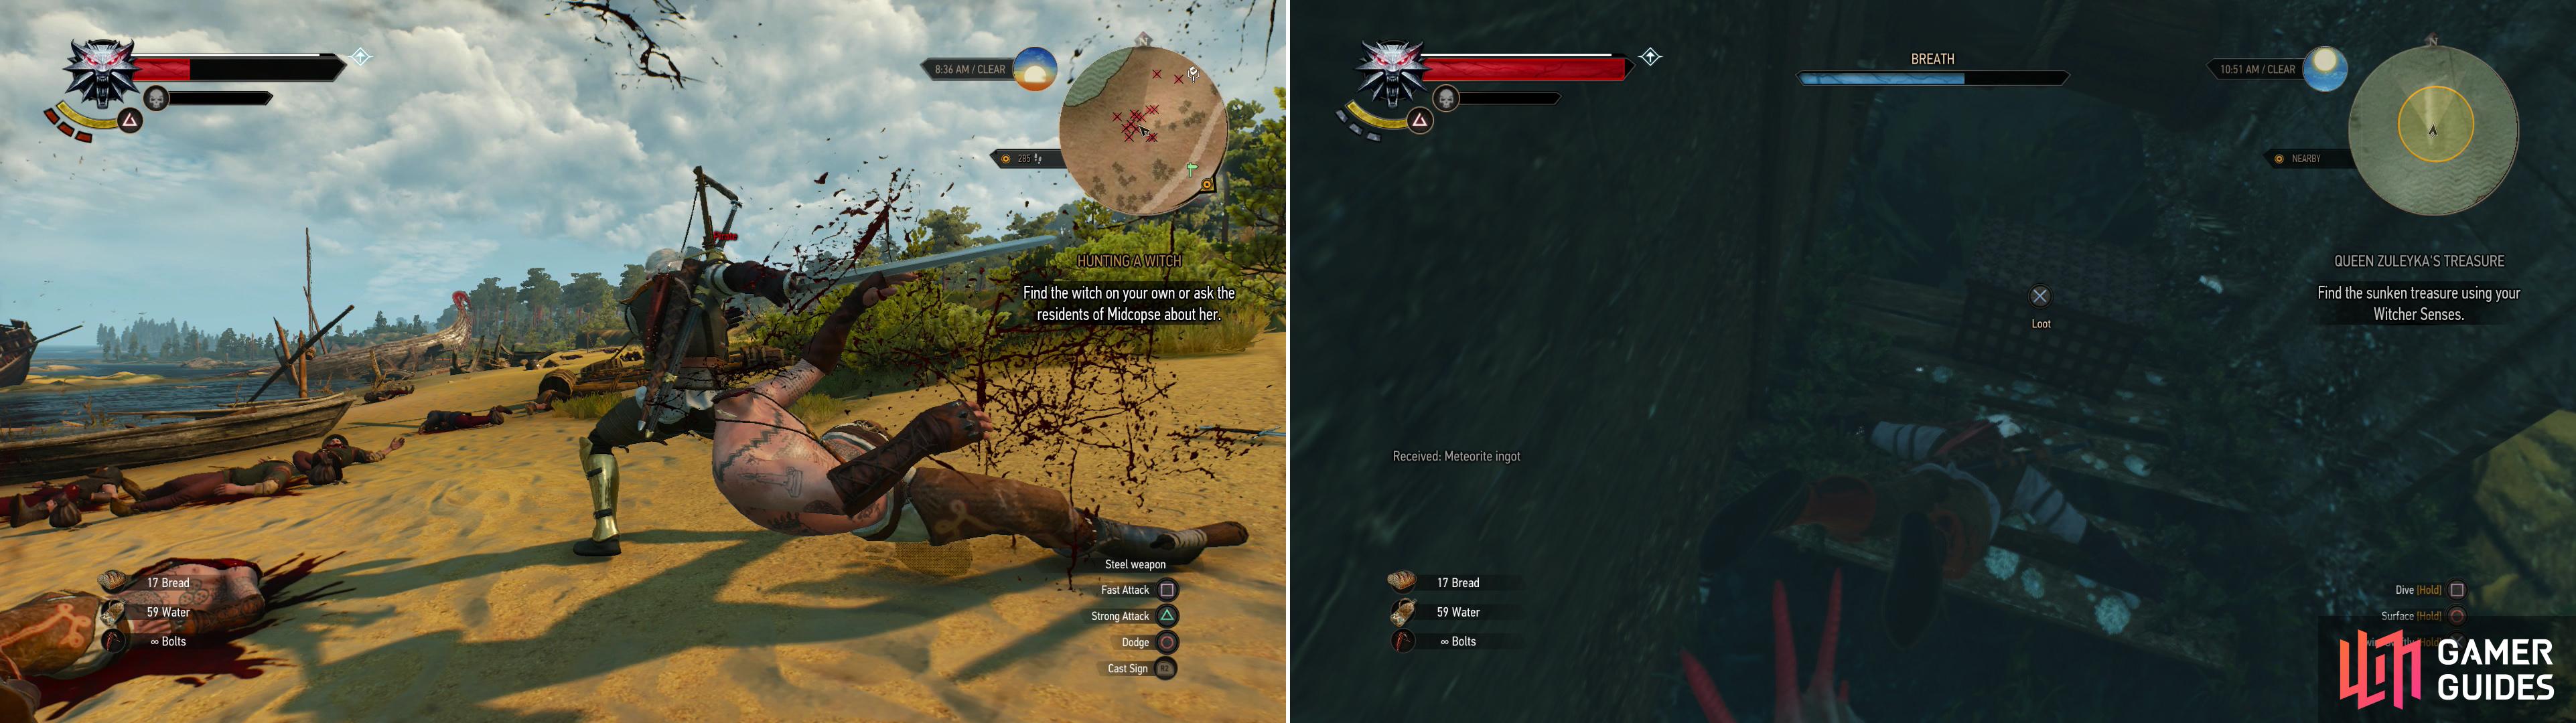 Decimate the horde of Pirates on the beach (left0 then swim in search of the wreckage containing the traesure they were looking for (right).